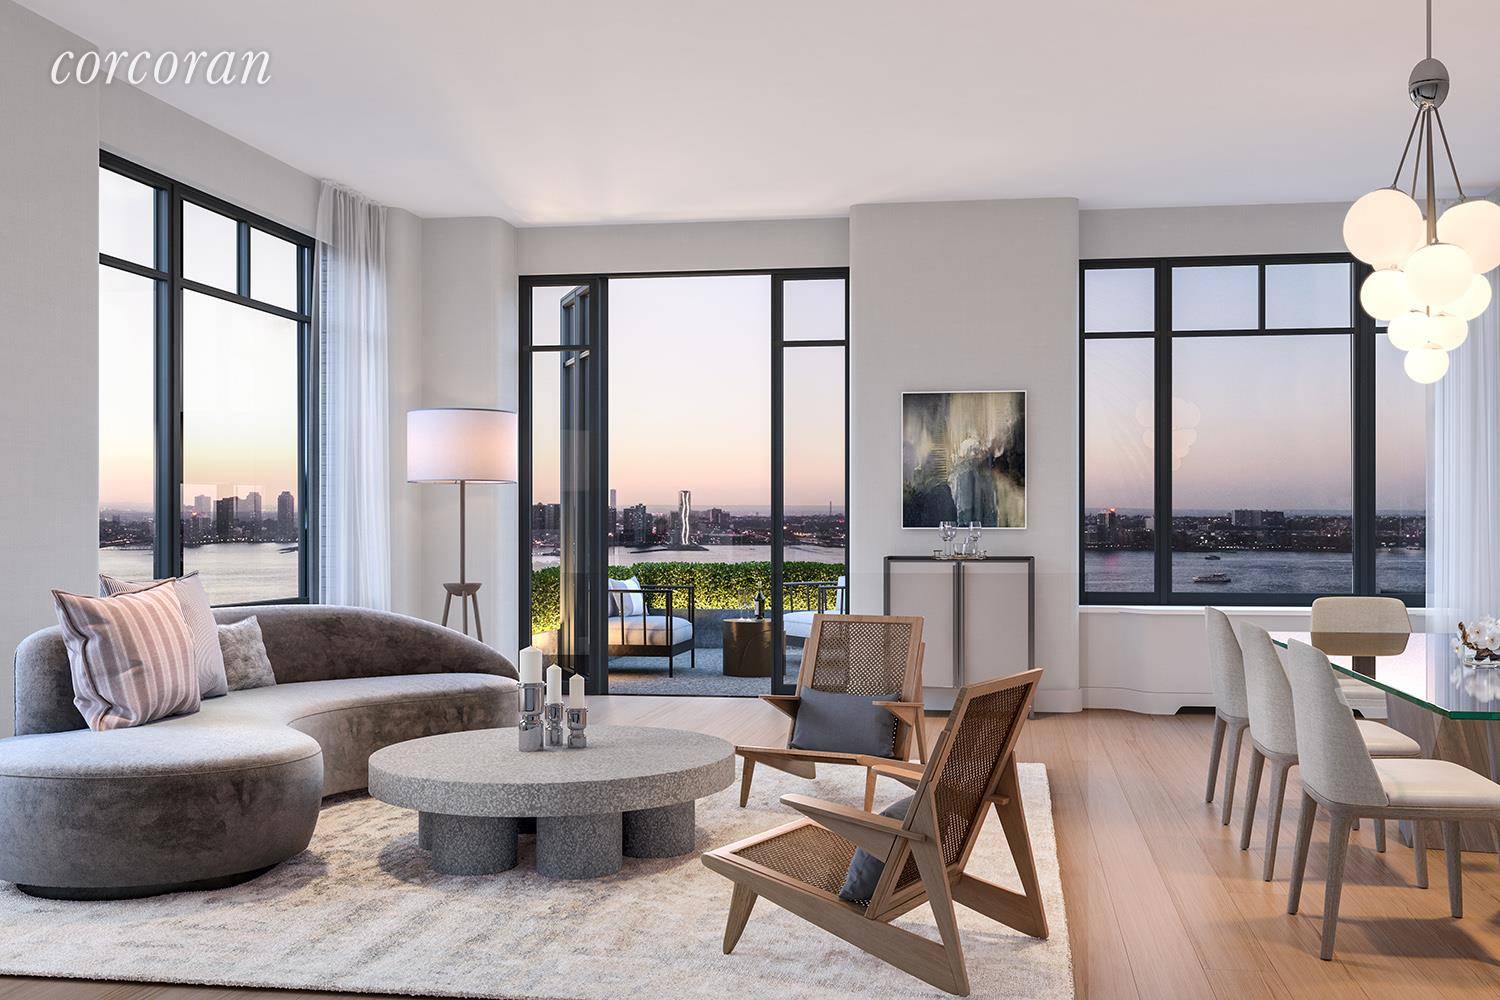 NEW BUYER INCENTIVE A First Time offered at Greenwich West.